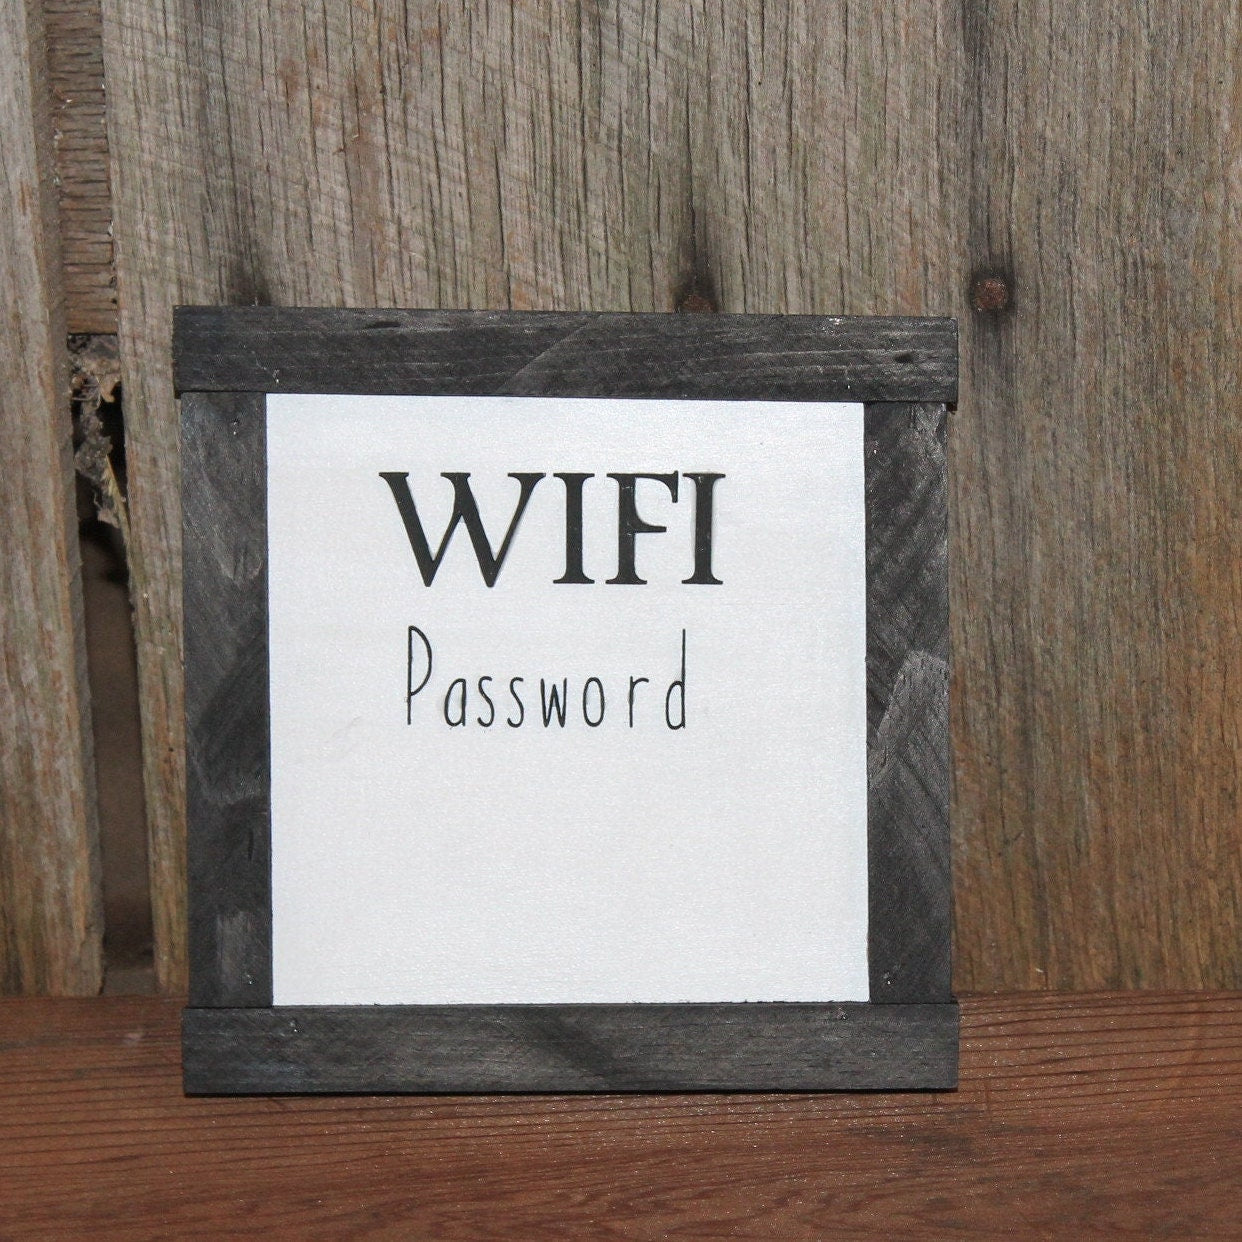 Sign for WIFI Password Wood Raised Text 3D Small Business Coffee Shop Black and White Customize Primitive Shabby Chic Wall Decor